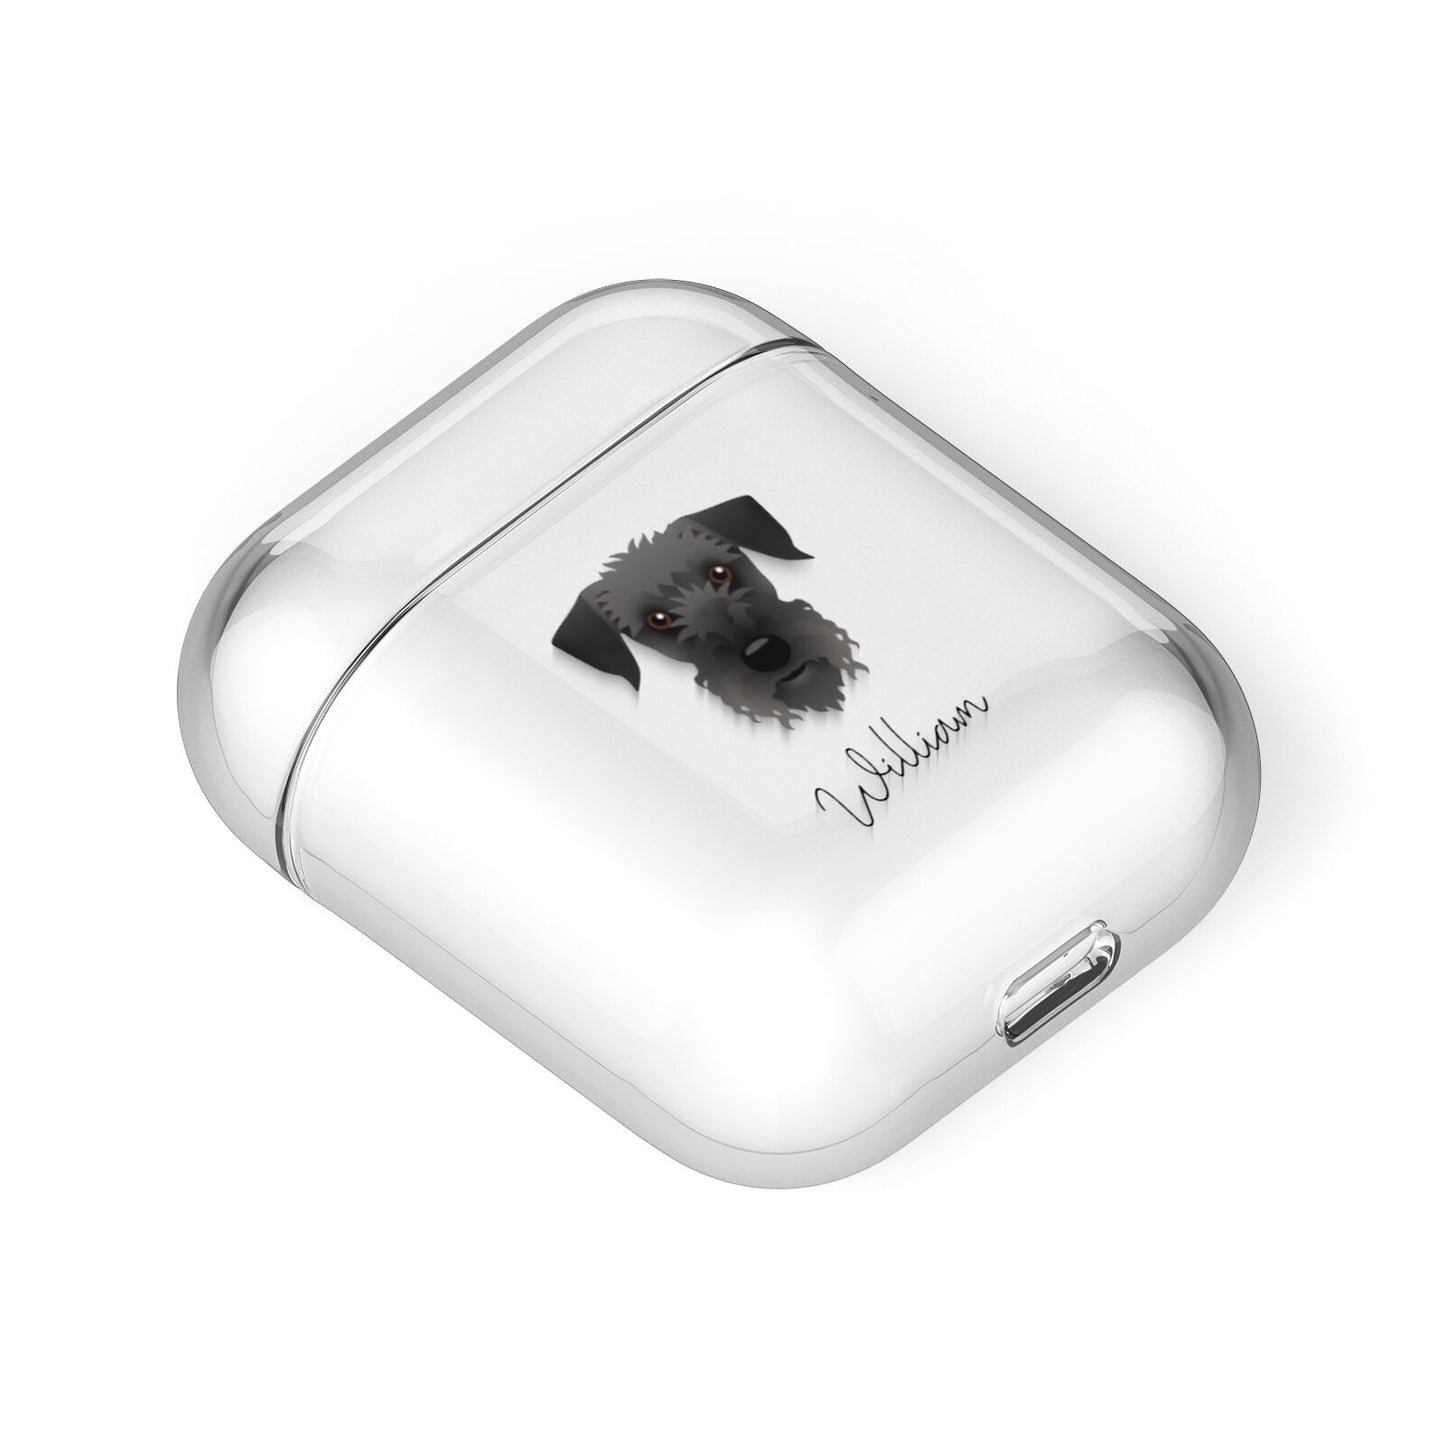 Cesky Terrier Personalised AirPods Case Laid Flat